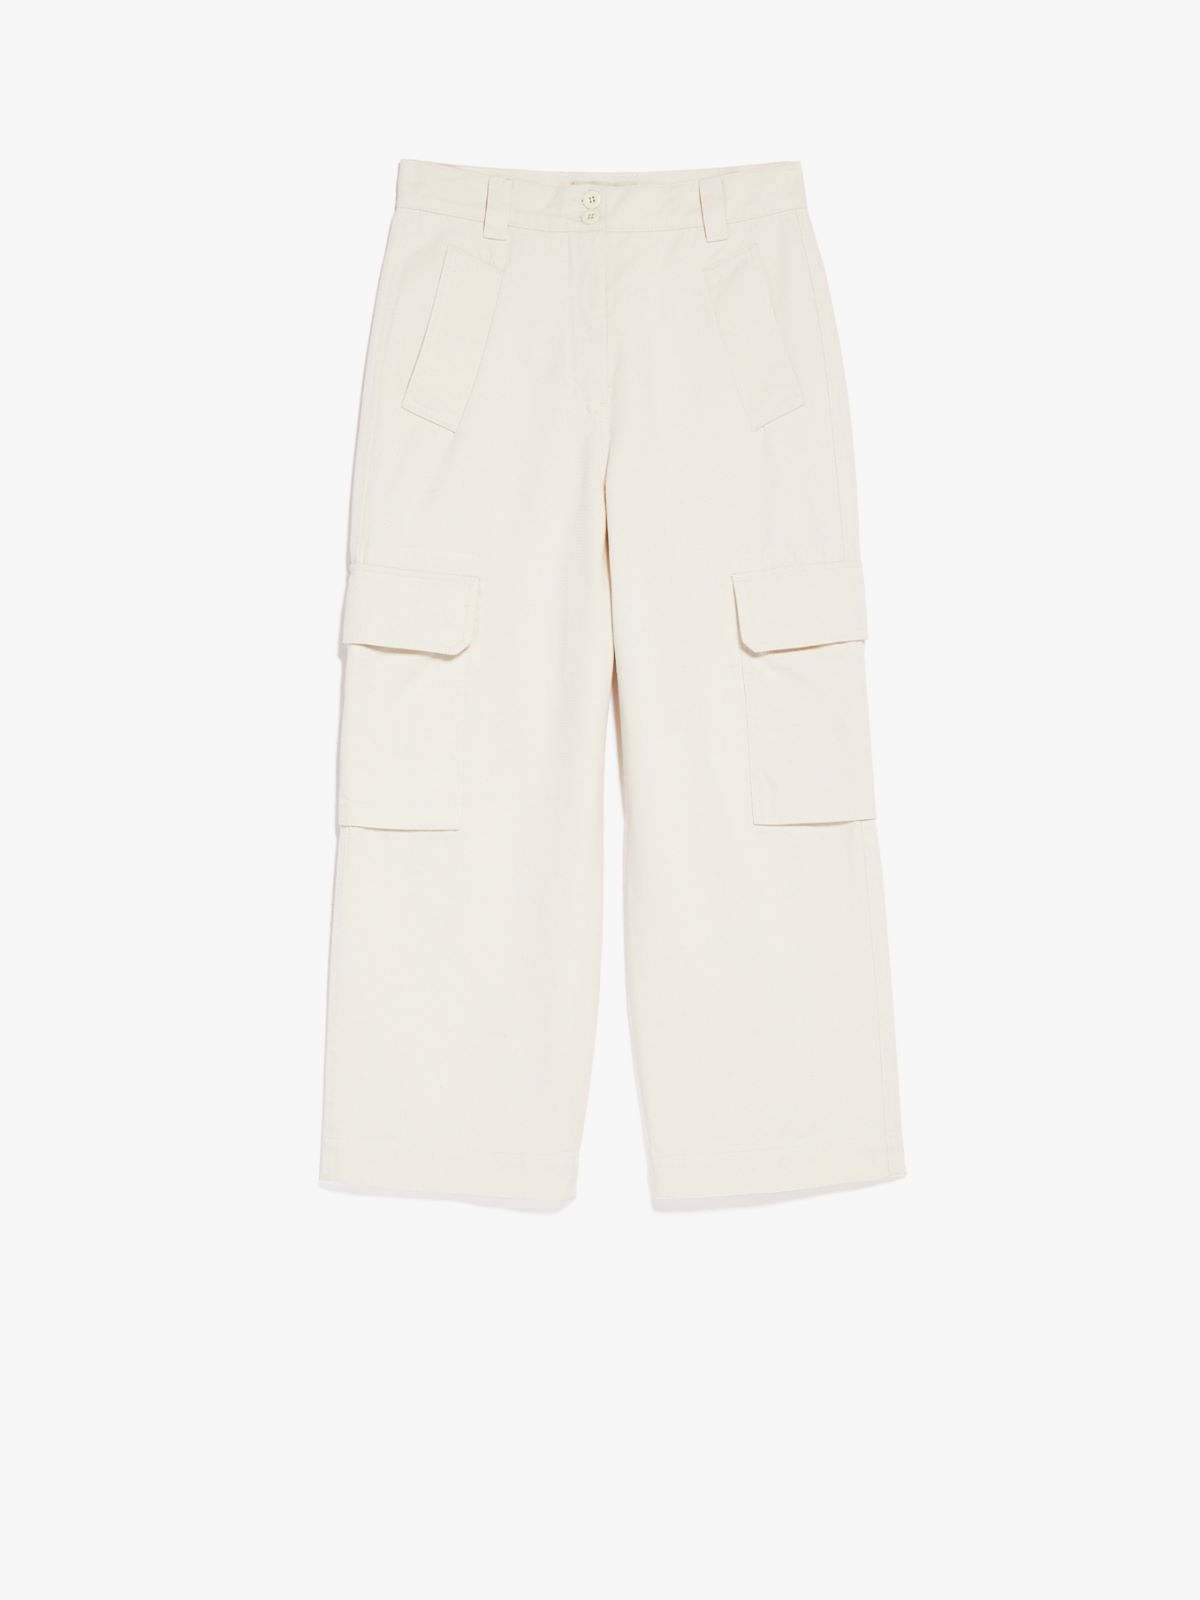 Cotton trousers - IVORY - Weekend Max Mara - 5